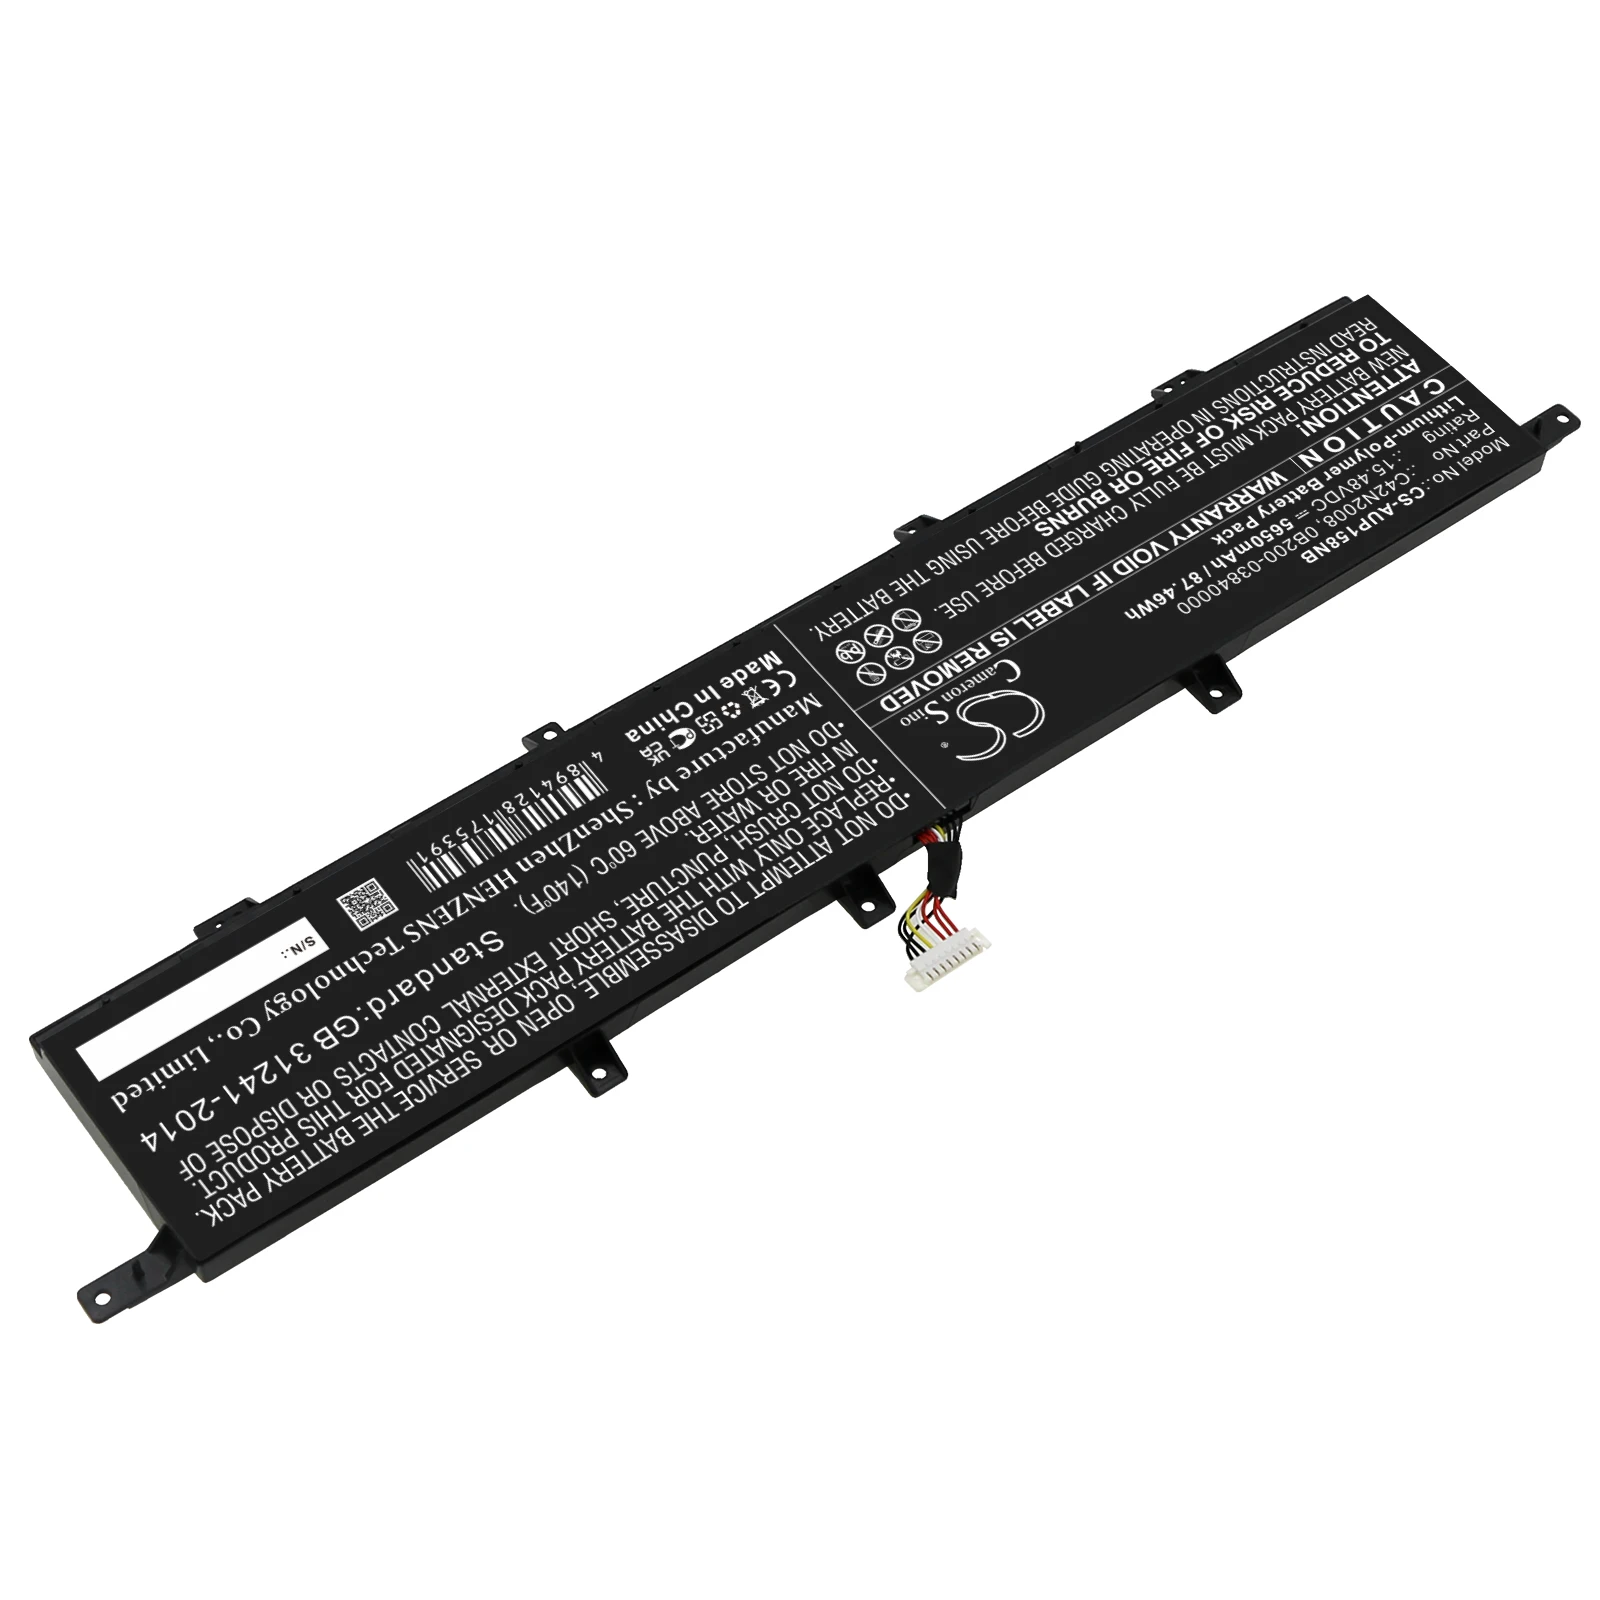 

battery for Asus ZenBook Pro Duo 15 OLED UX582LR-H0701TS,Zenbook Pro Duo 15 OLED UX582LR-XS94T,C42N2008,0B200-03840000